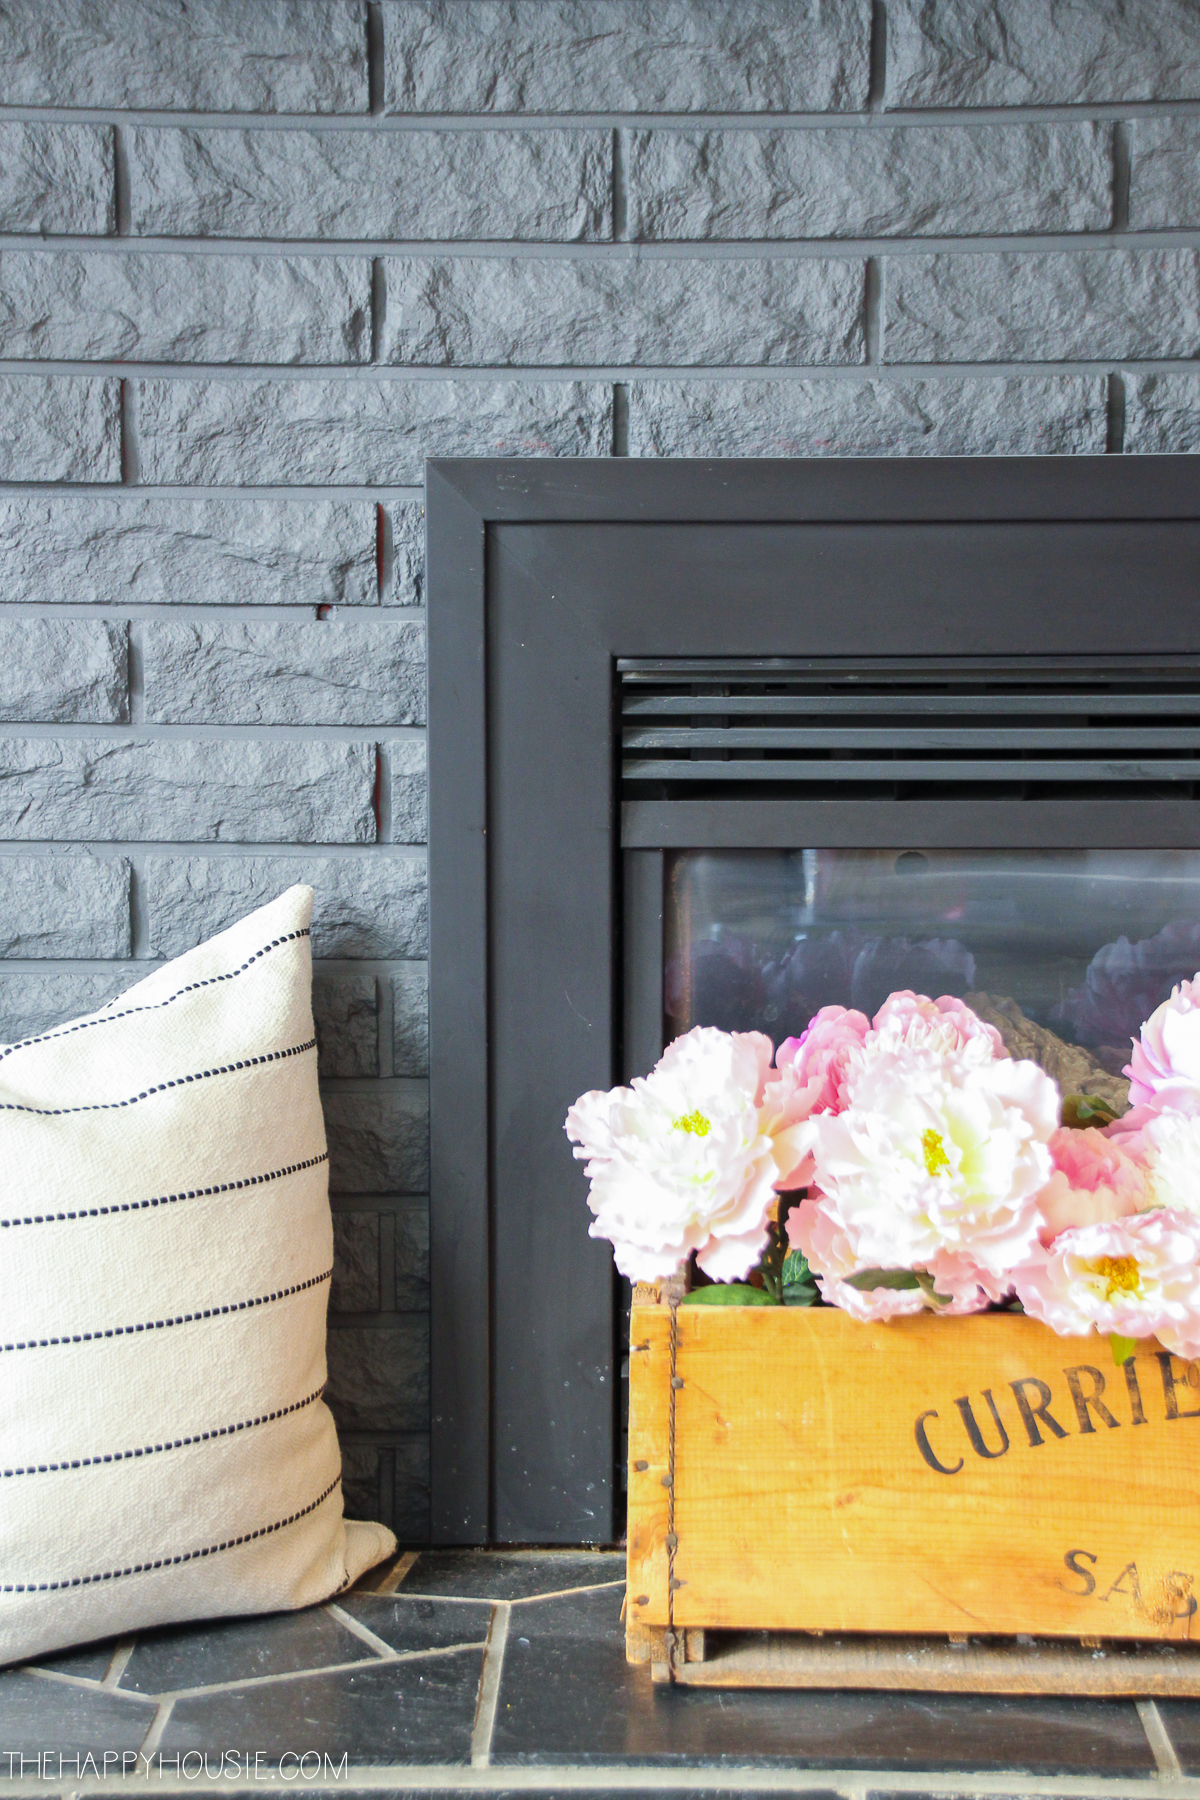 Up close picture of the fireplace with peonies in front of it in a wooden box.